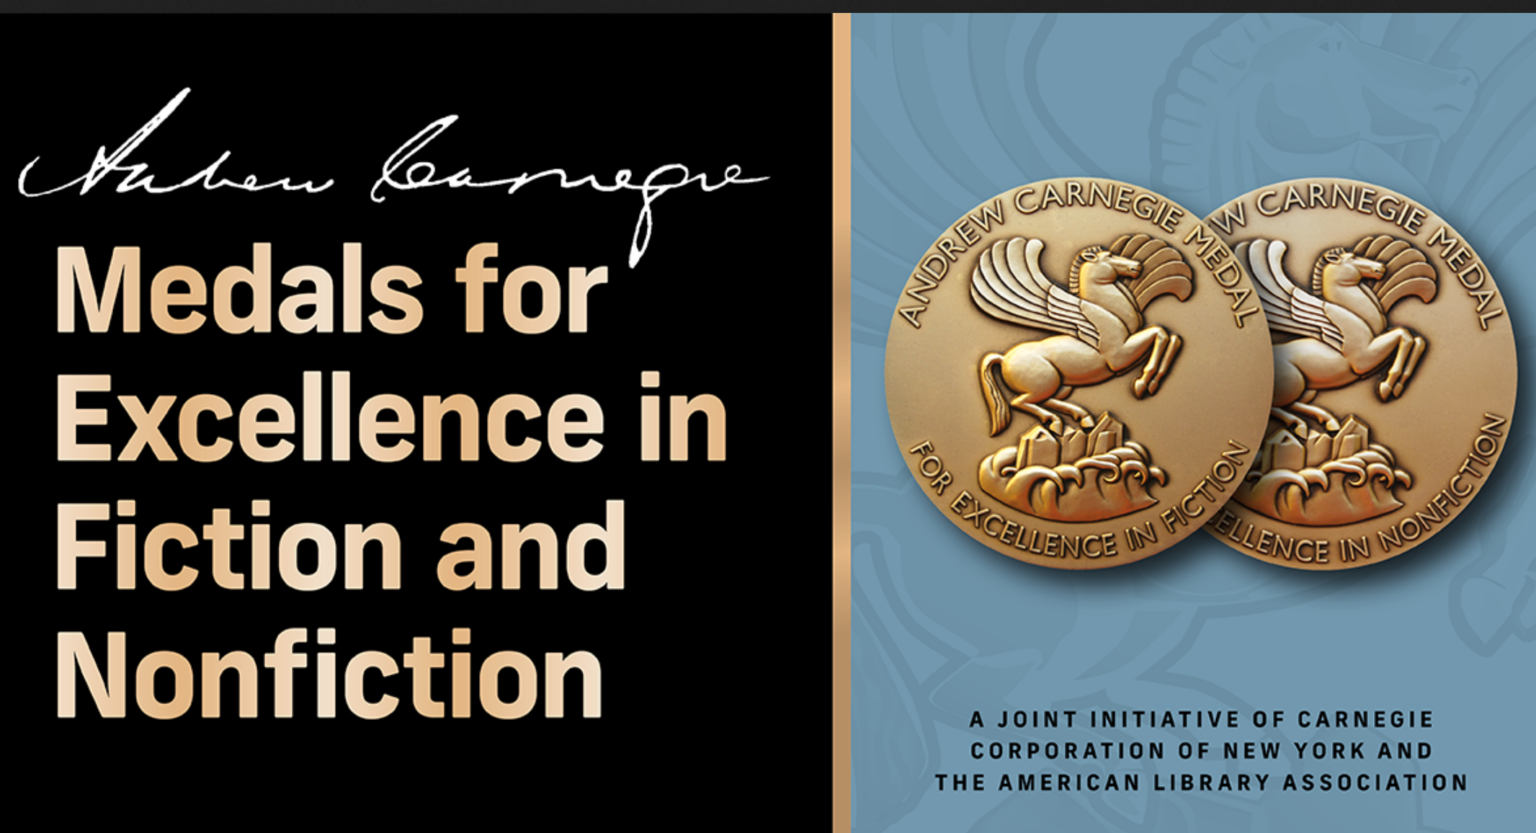 ALA Announces Winners of 2021 Andrew Carnegie Medals for Excellence in